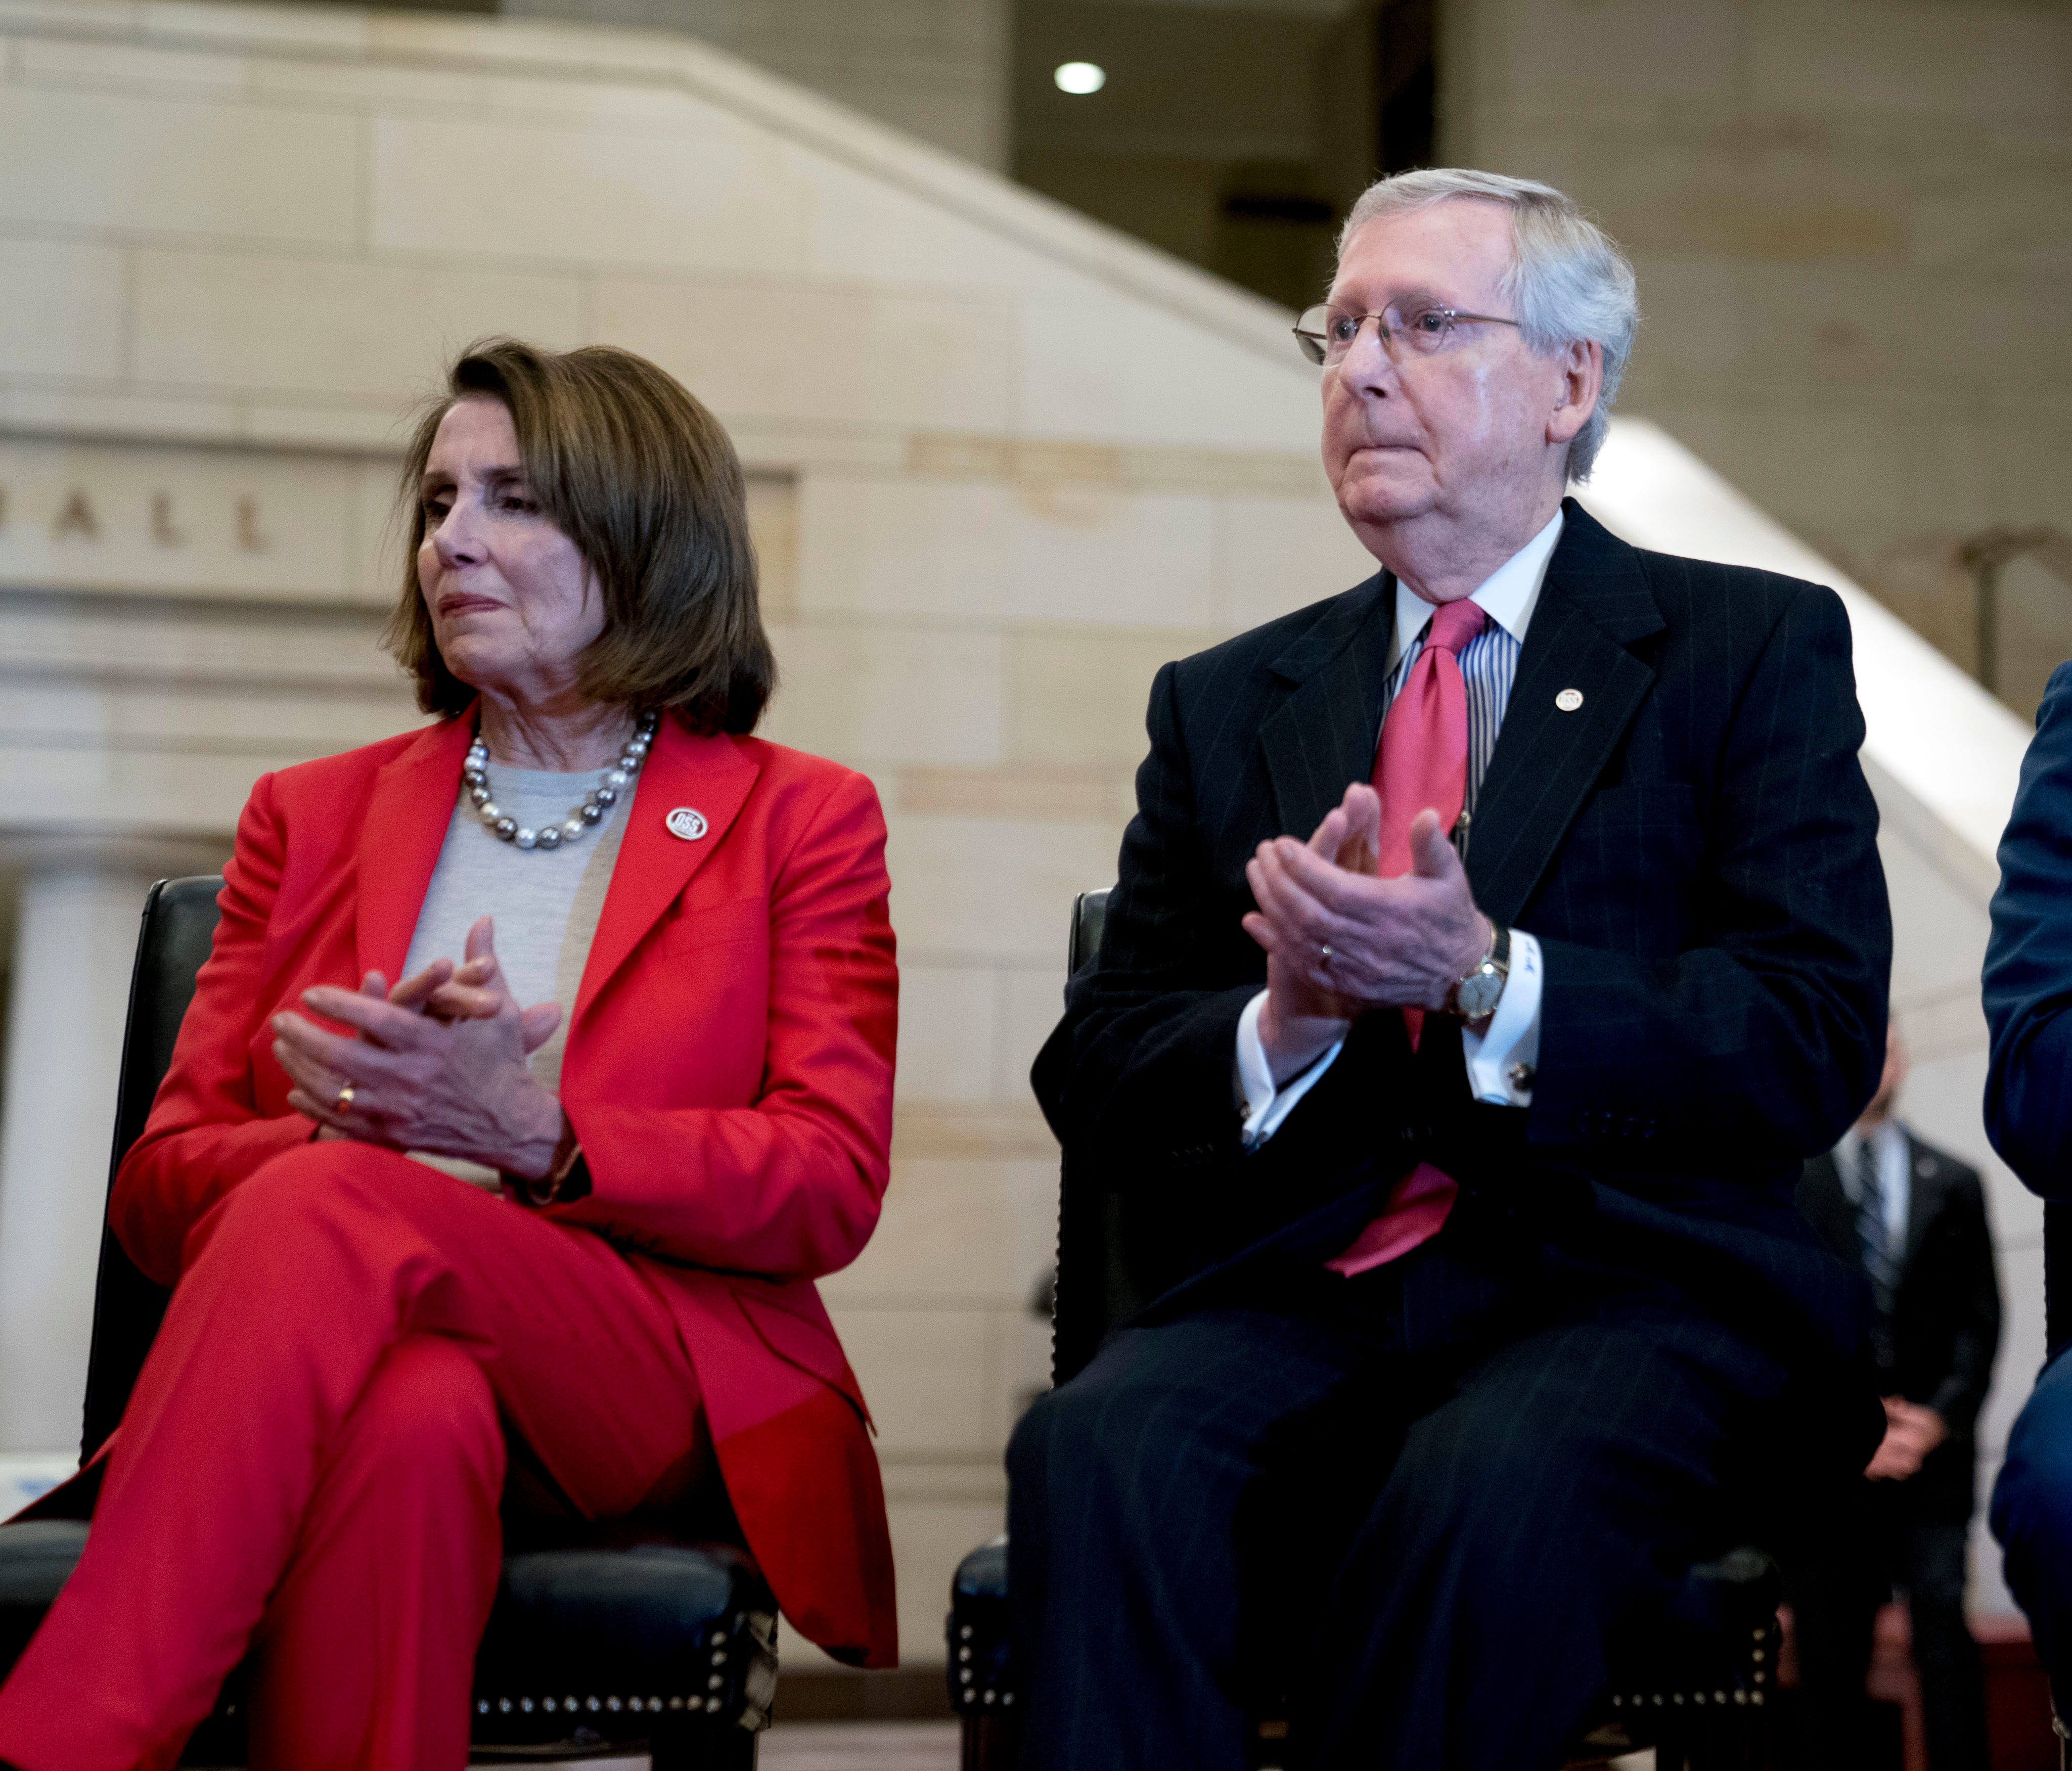 From left, House Minority Leader Nancy Pelosi of Calif., Senate Majority Leader Mitch McConnell of Ky., and House Speaker Paul Ryan of Wis., appear together on Capitol Hill in Washington, March 21, 2018.